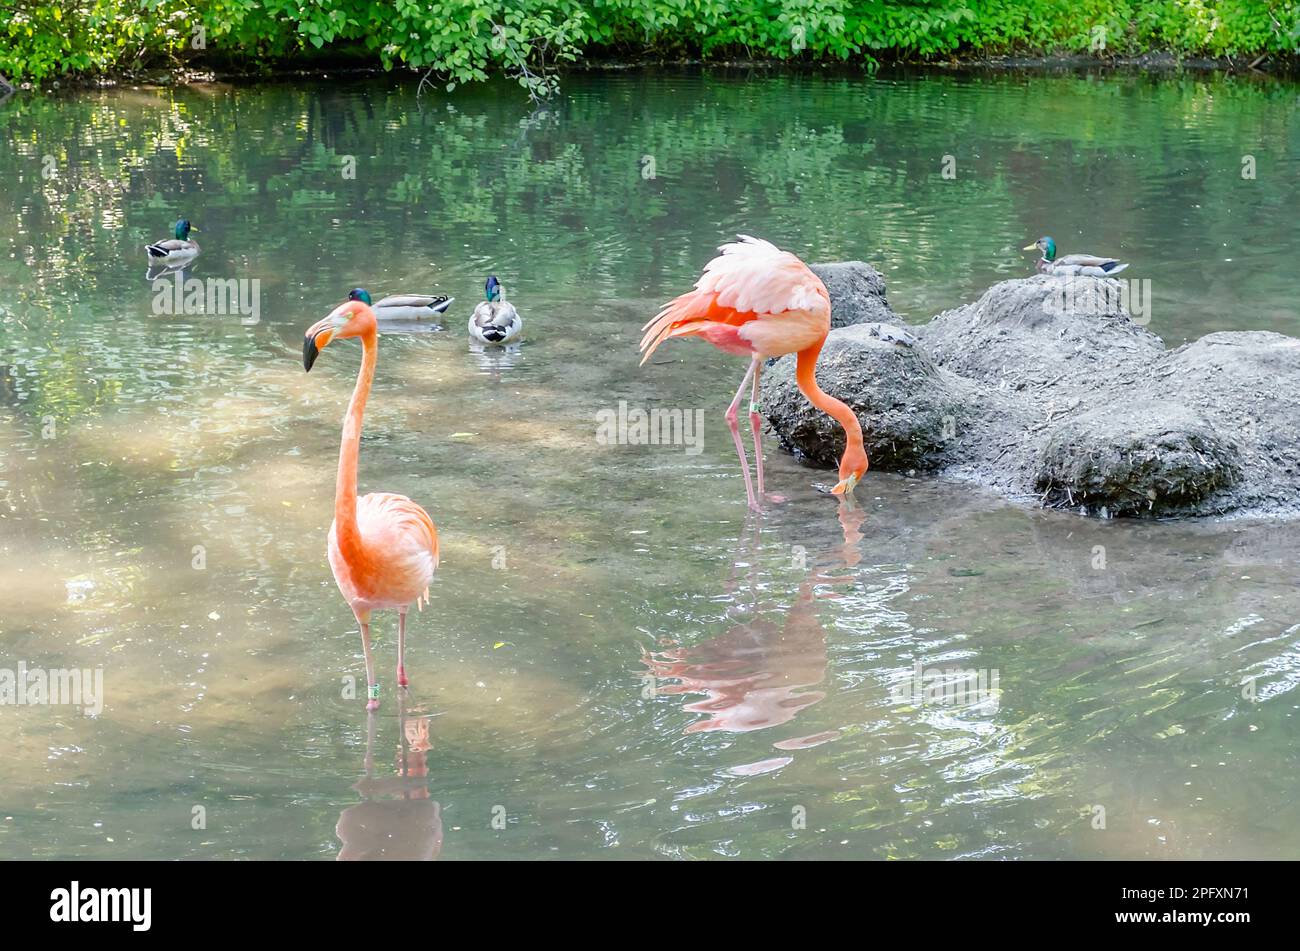 A group of colorful flamingos bathing in the pond Stock Photo